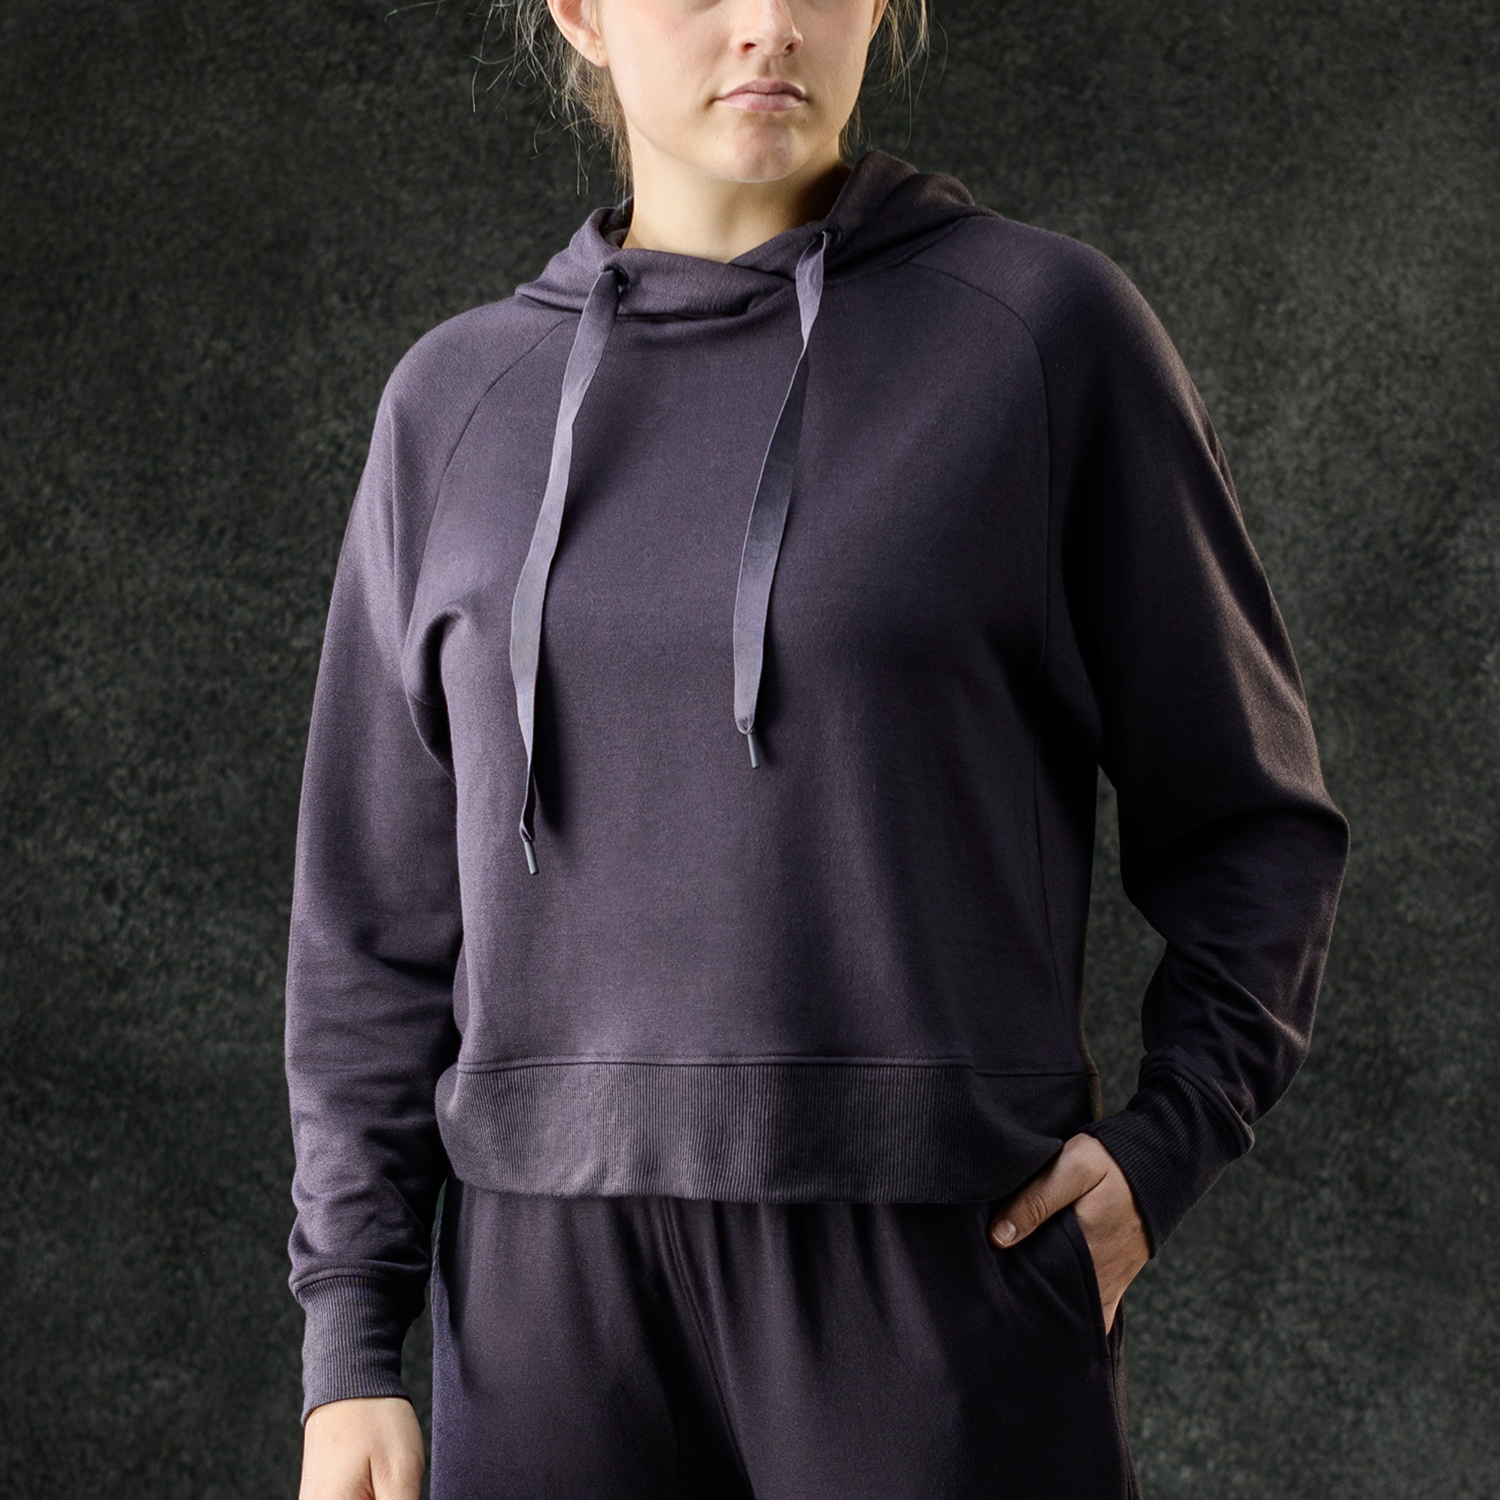 Lululemon shoppers are obsessed with this fleece Scuba hoodie for